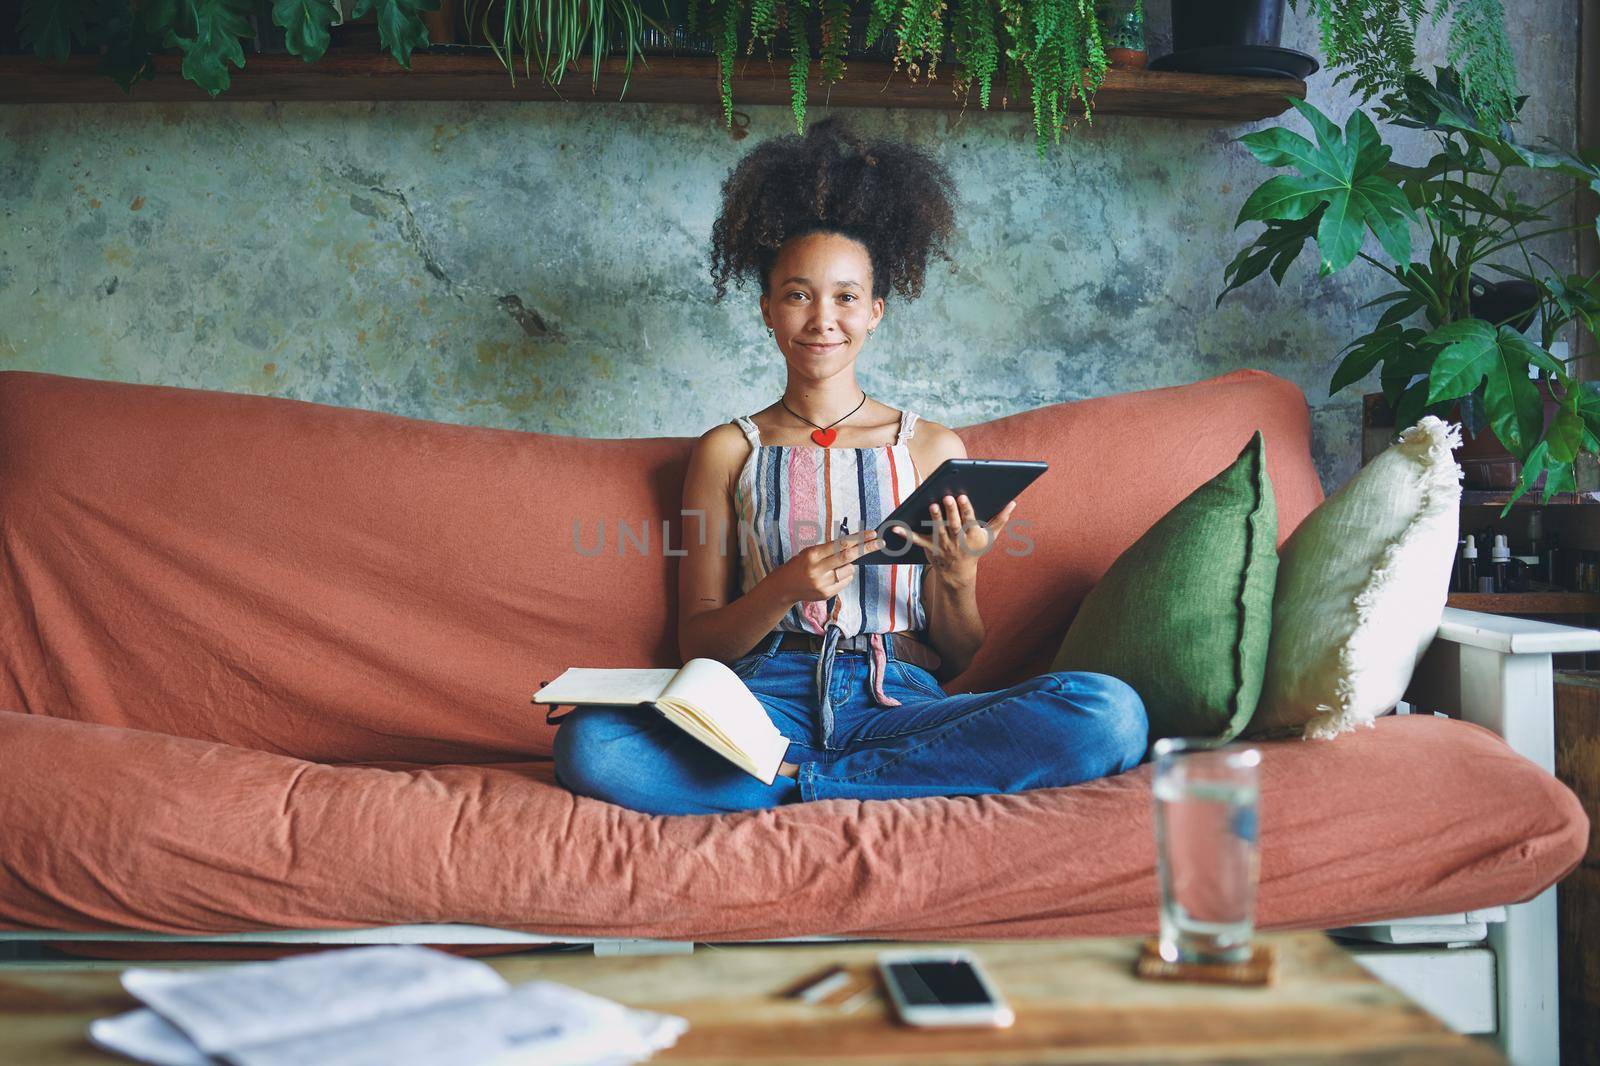 I'm at my happiest on my sofa - stock photo by VizDelux